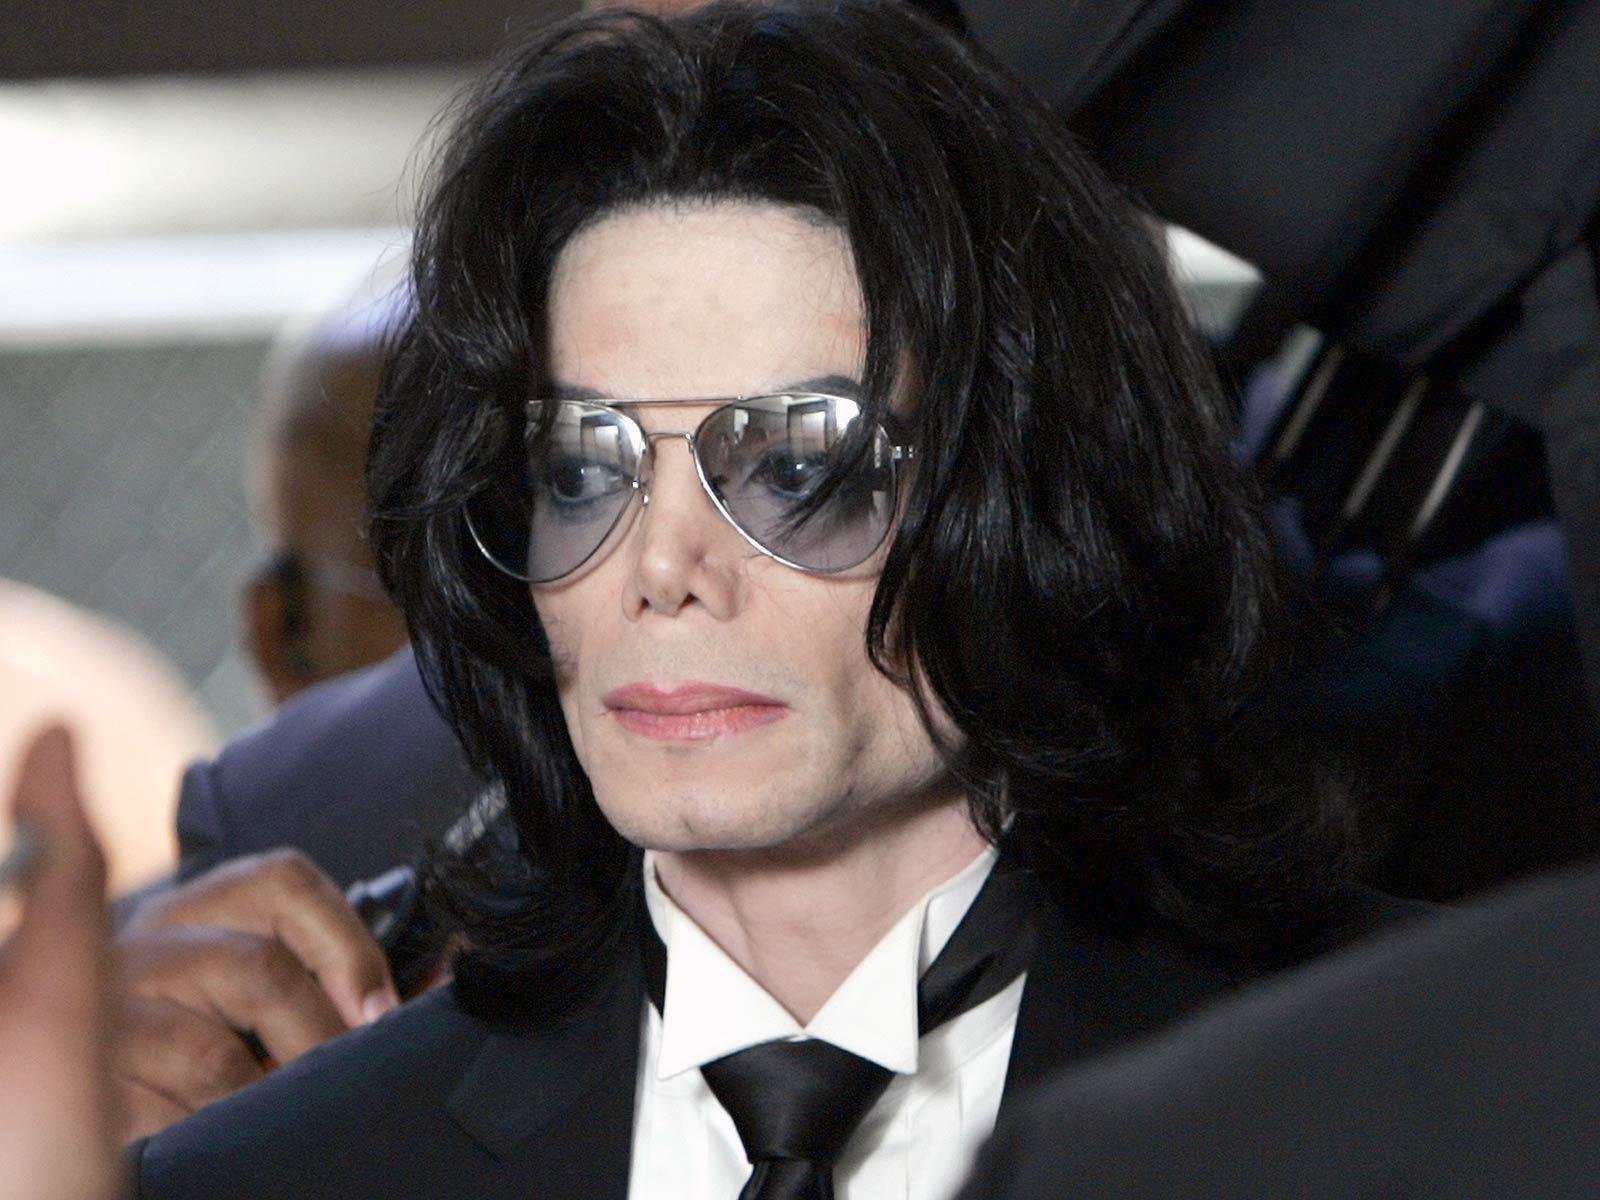 Michael Jackson accused of child sexual abuse by a 13-year-old boy